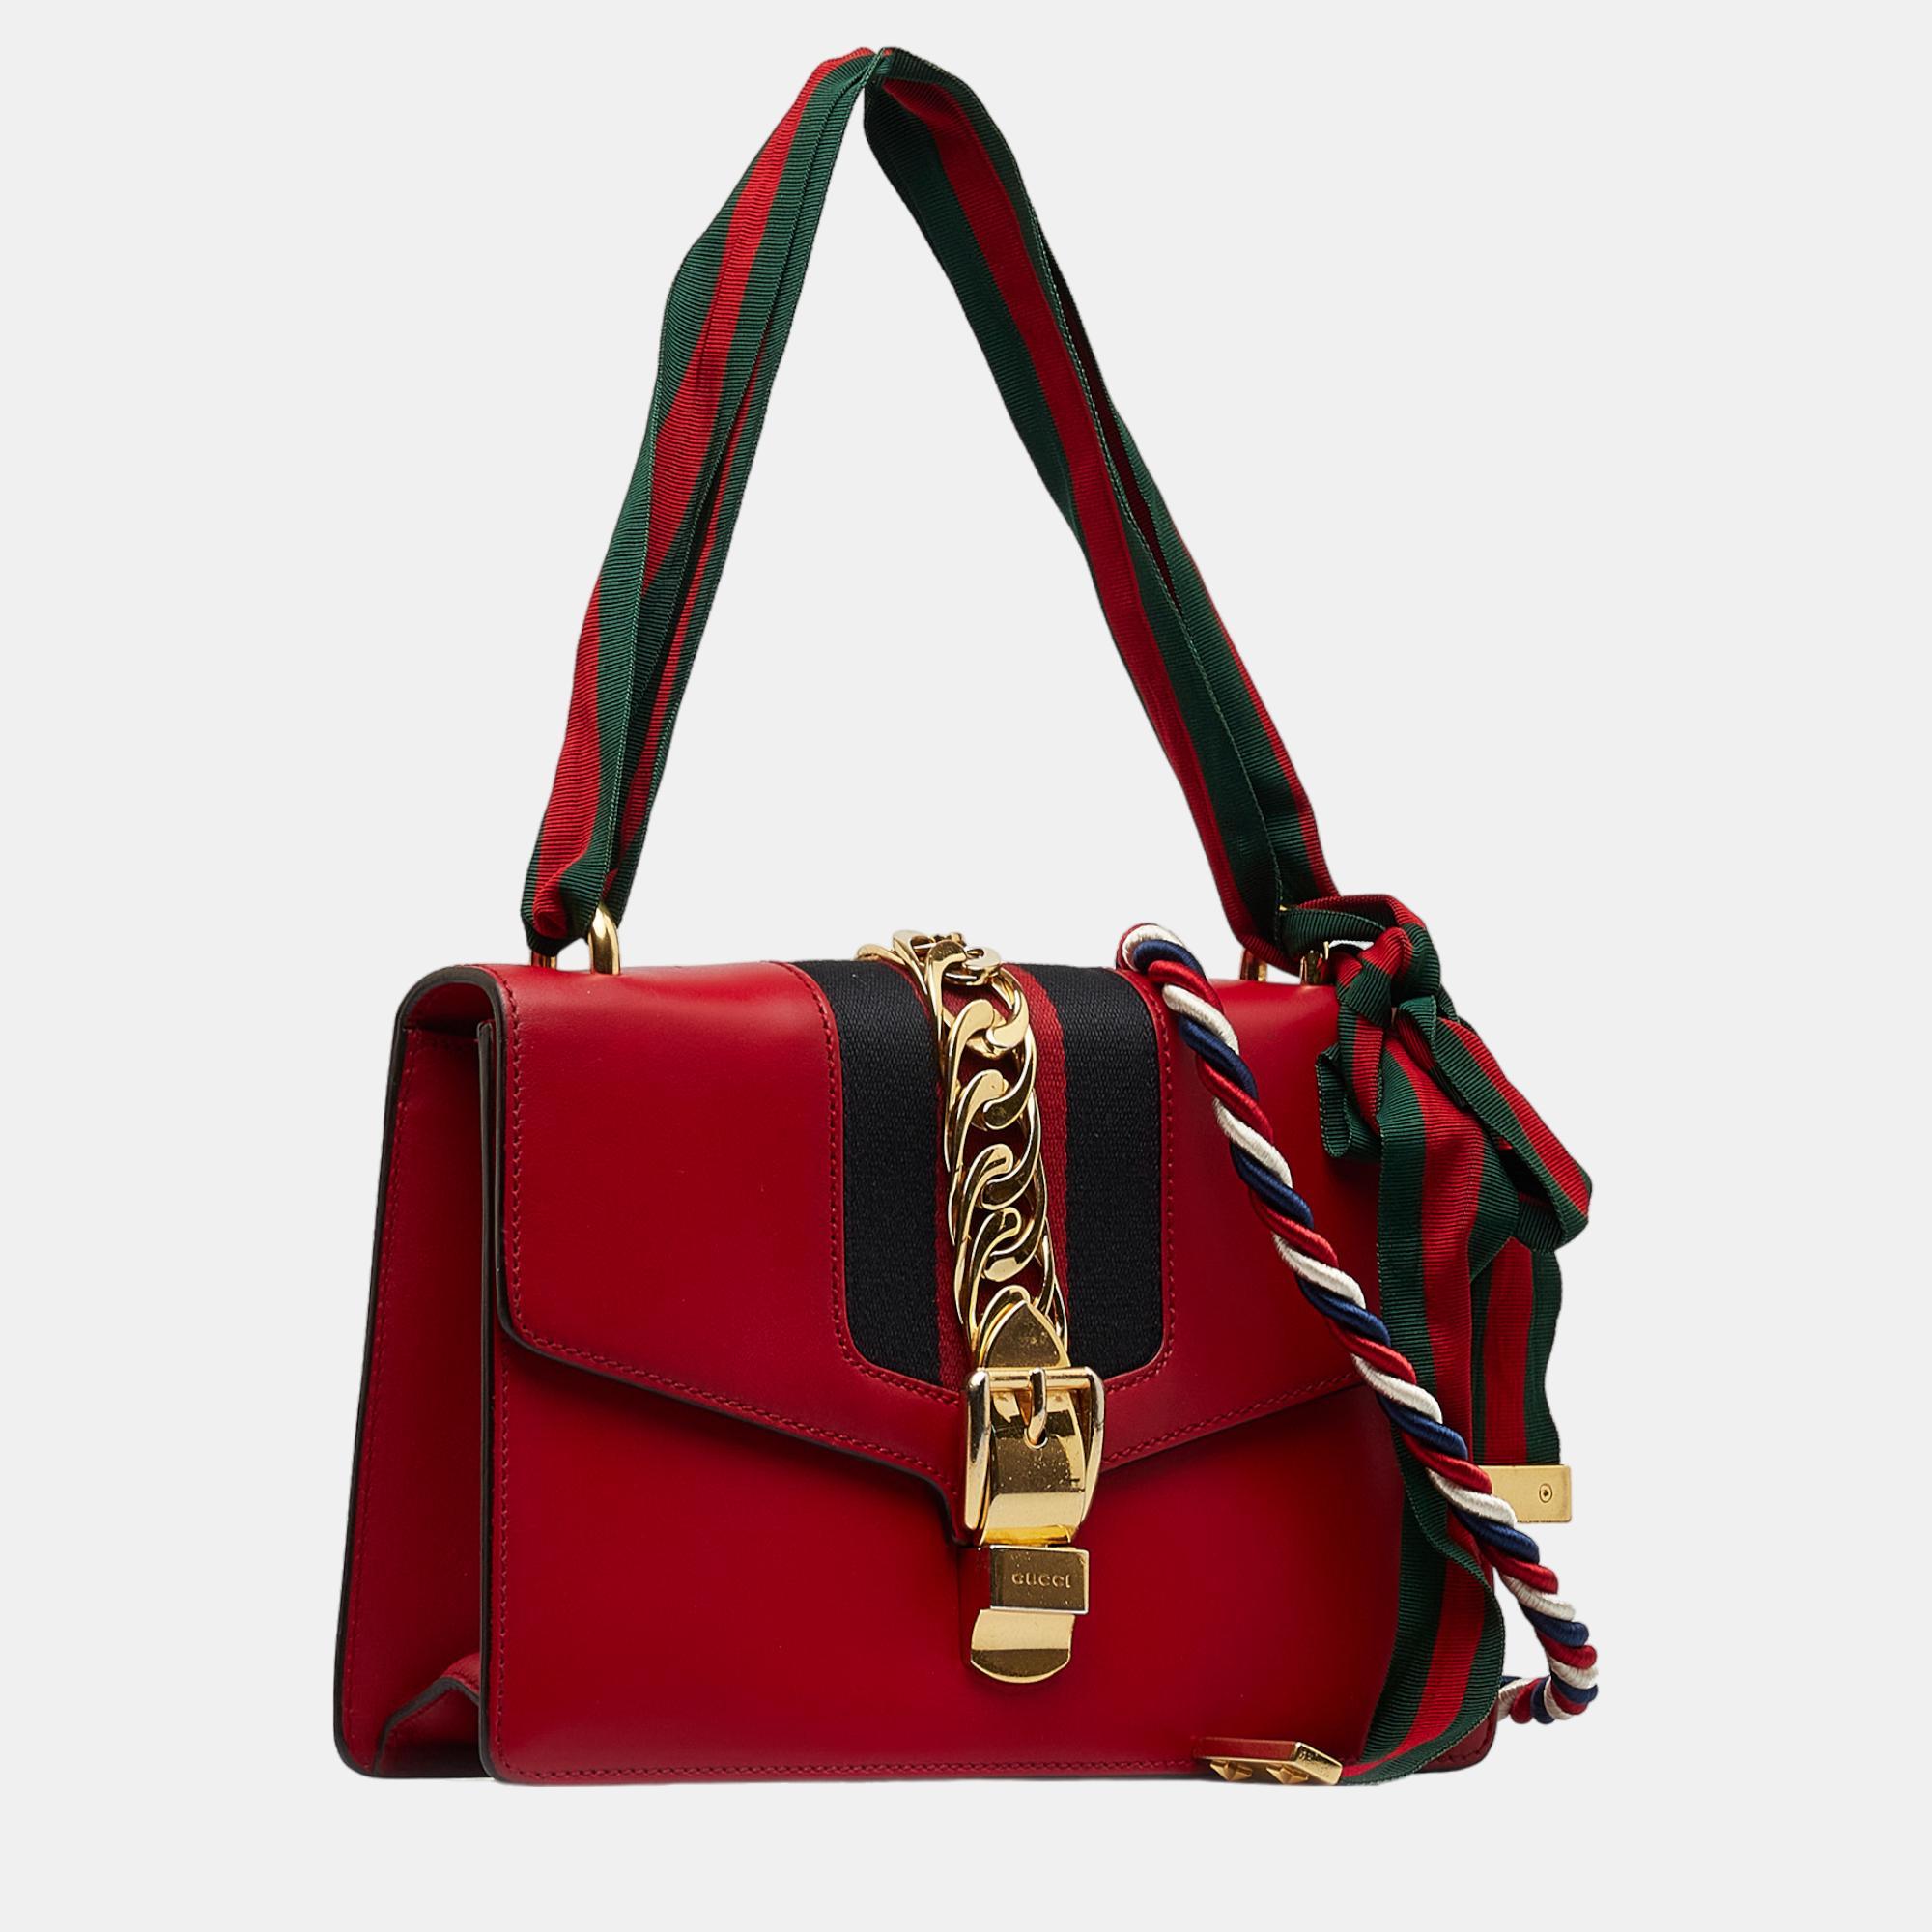 

Gucci Red Small Sylvie Satchel